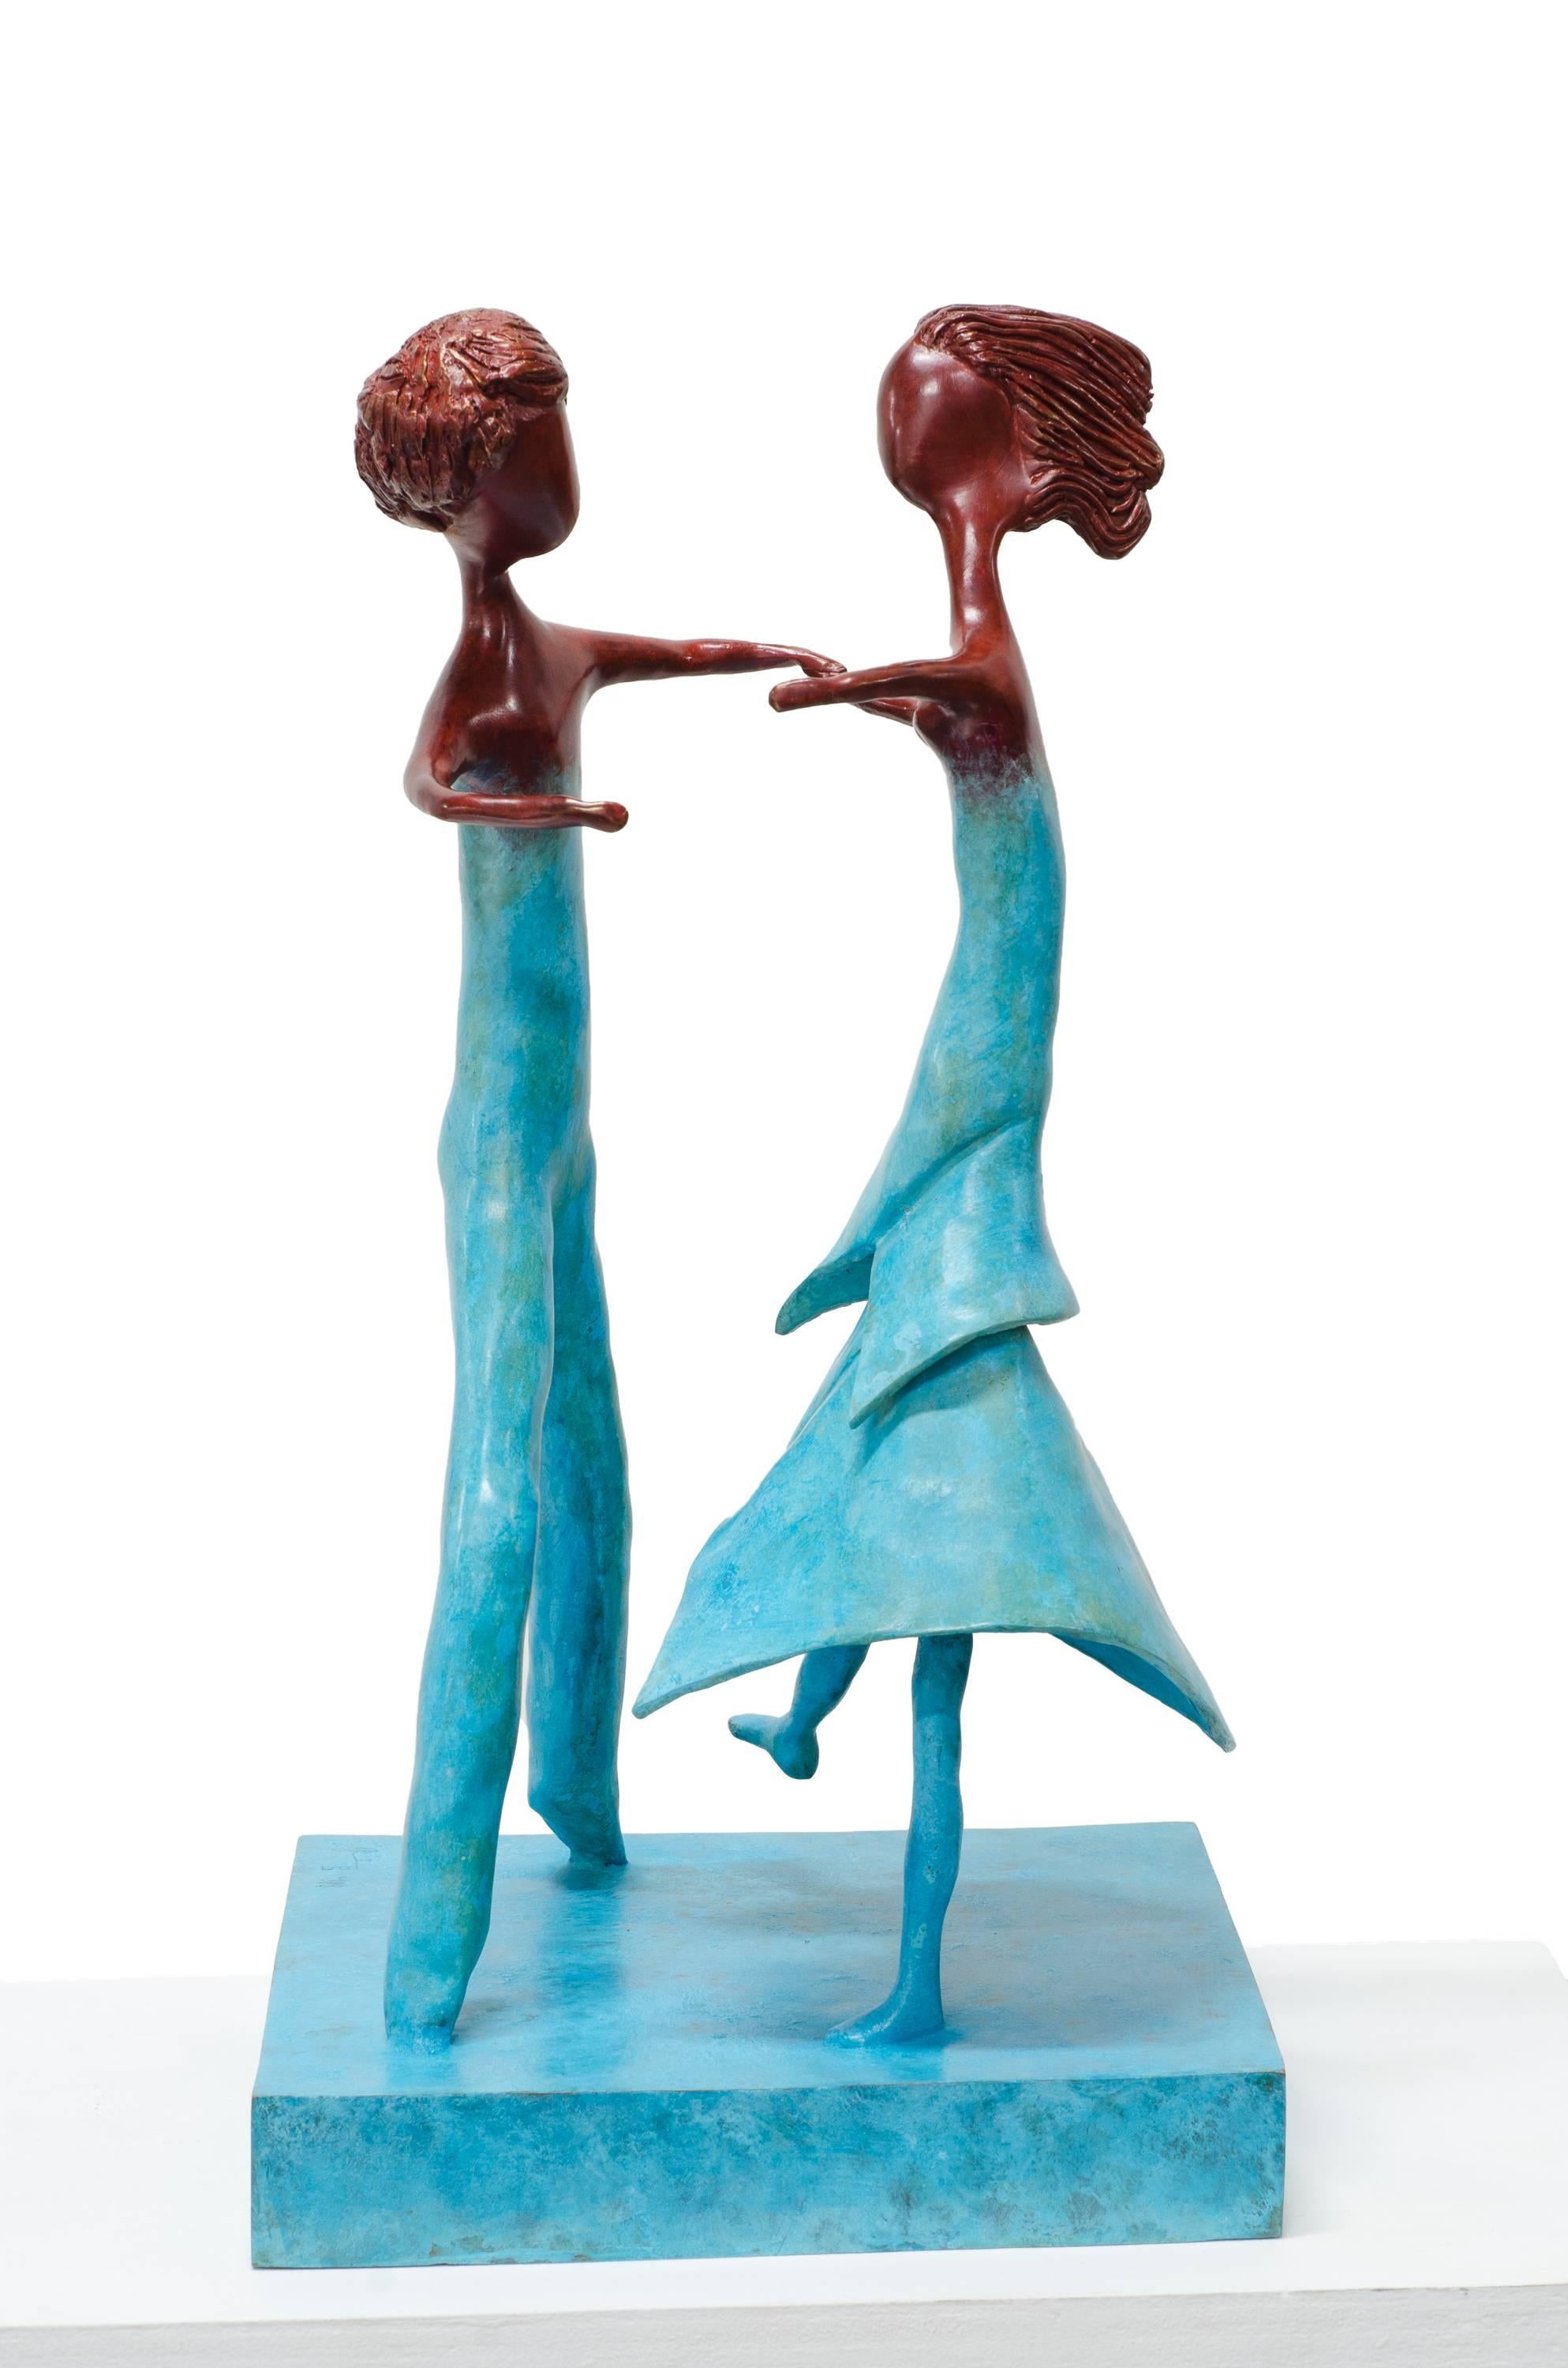 Falling in Love. Are they dancing? no, they are in their own world - Sculpture by Beatriz Gerenstein